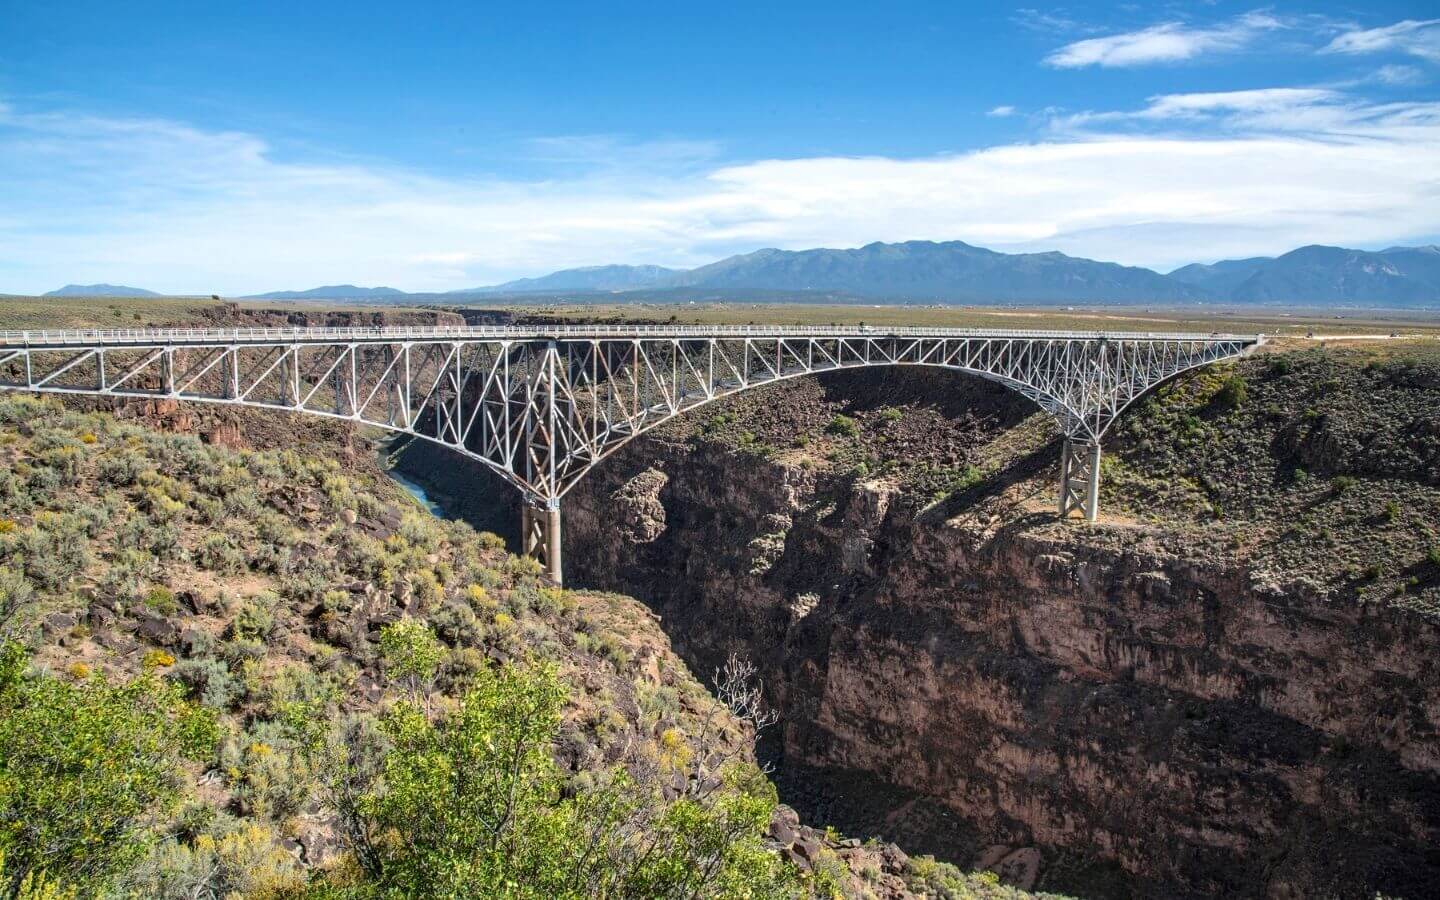 Stunning bridge over two mountains on the way to taos nm amidst blue skies